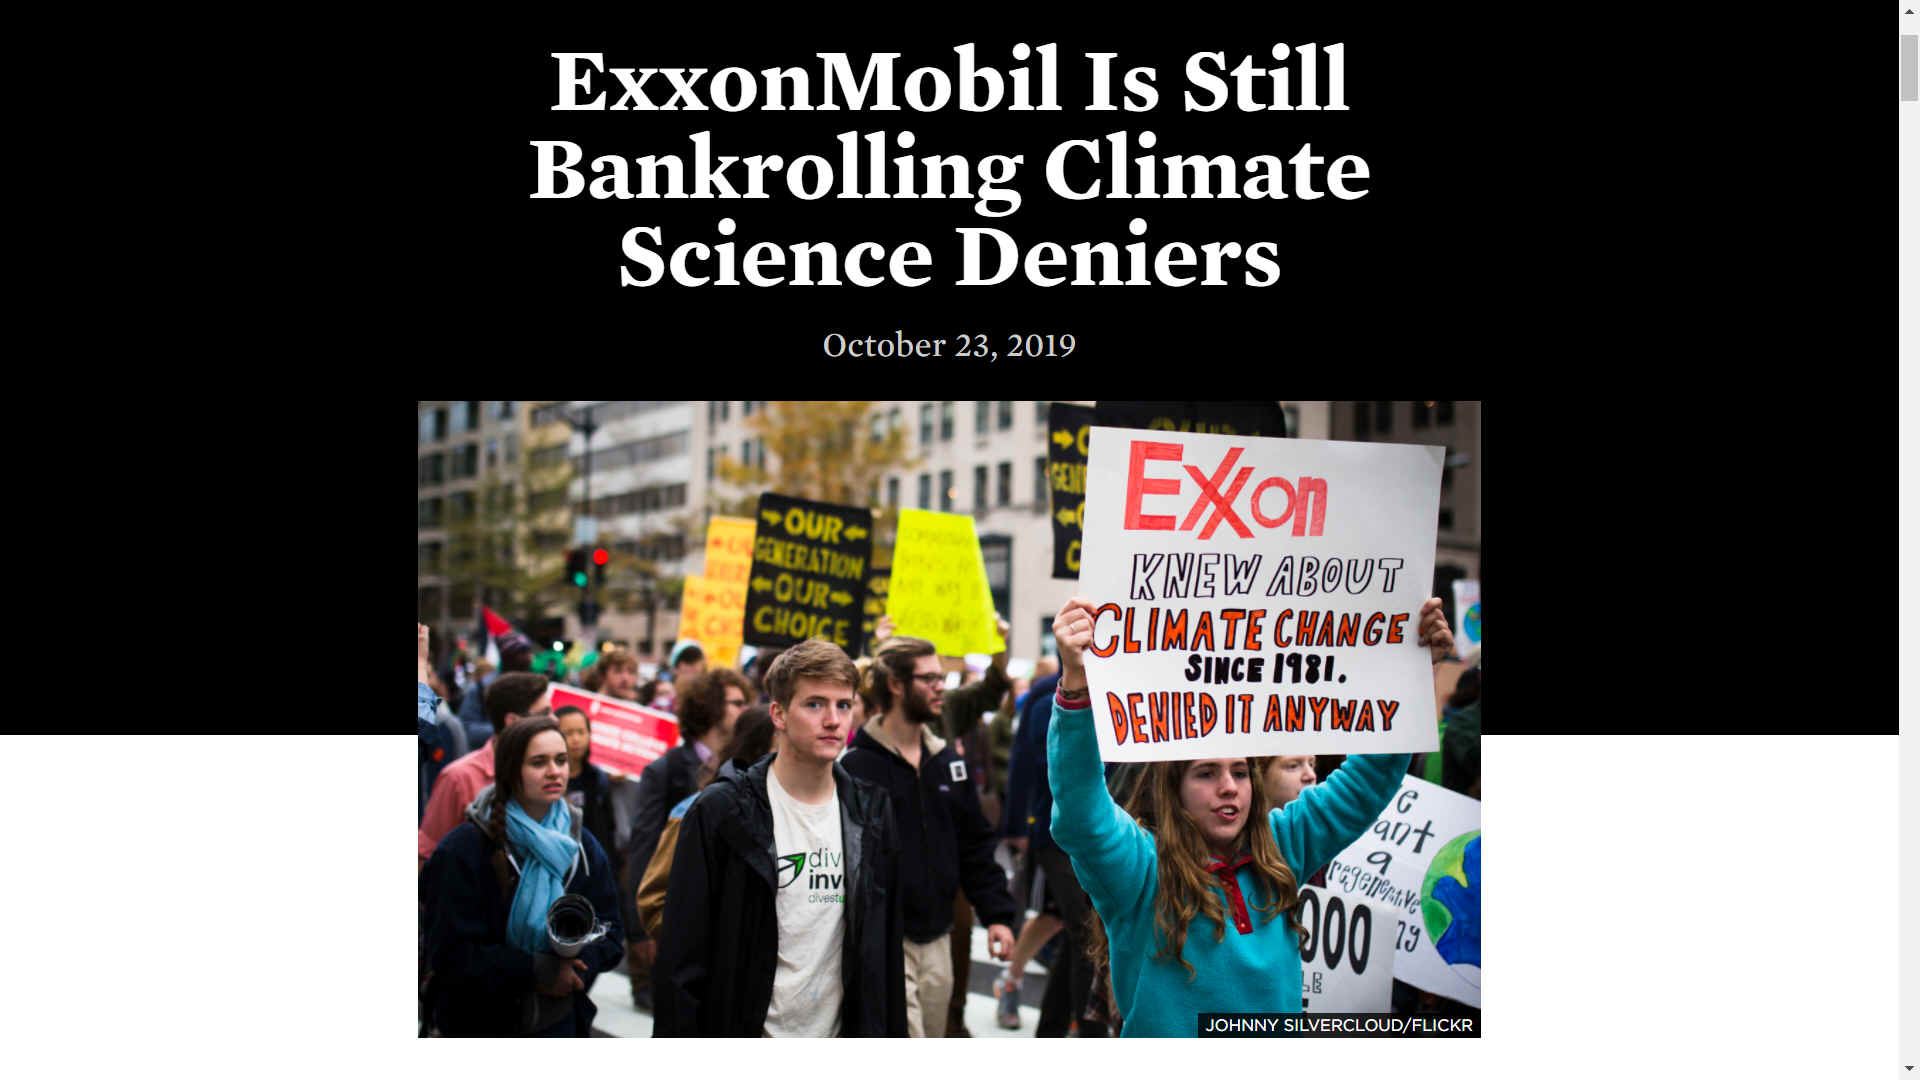 ExxonMobil knew about climate change in 1981, but did nothing about it, business as usual